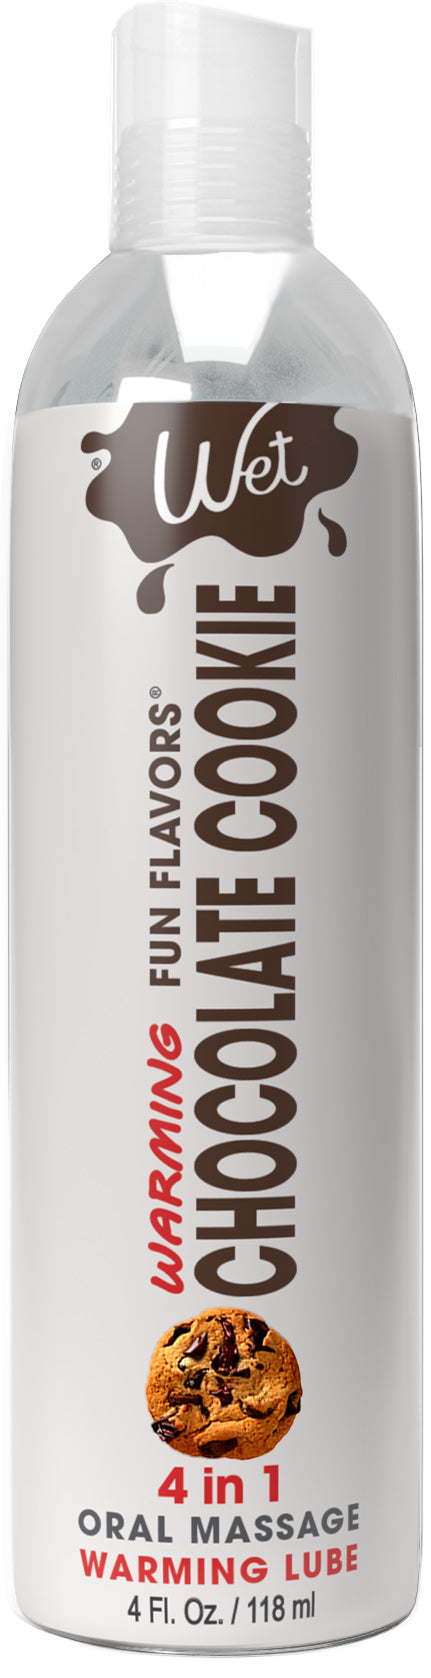 Wet Warming Fun Flavors - Chocolate Cookie - 4 in  1 Lubricant 4 Oz